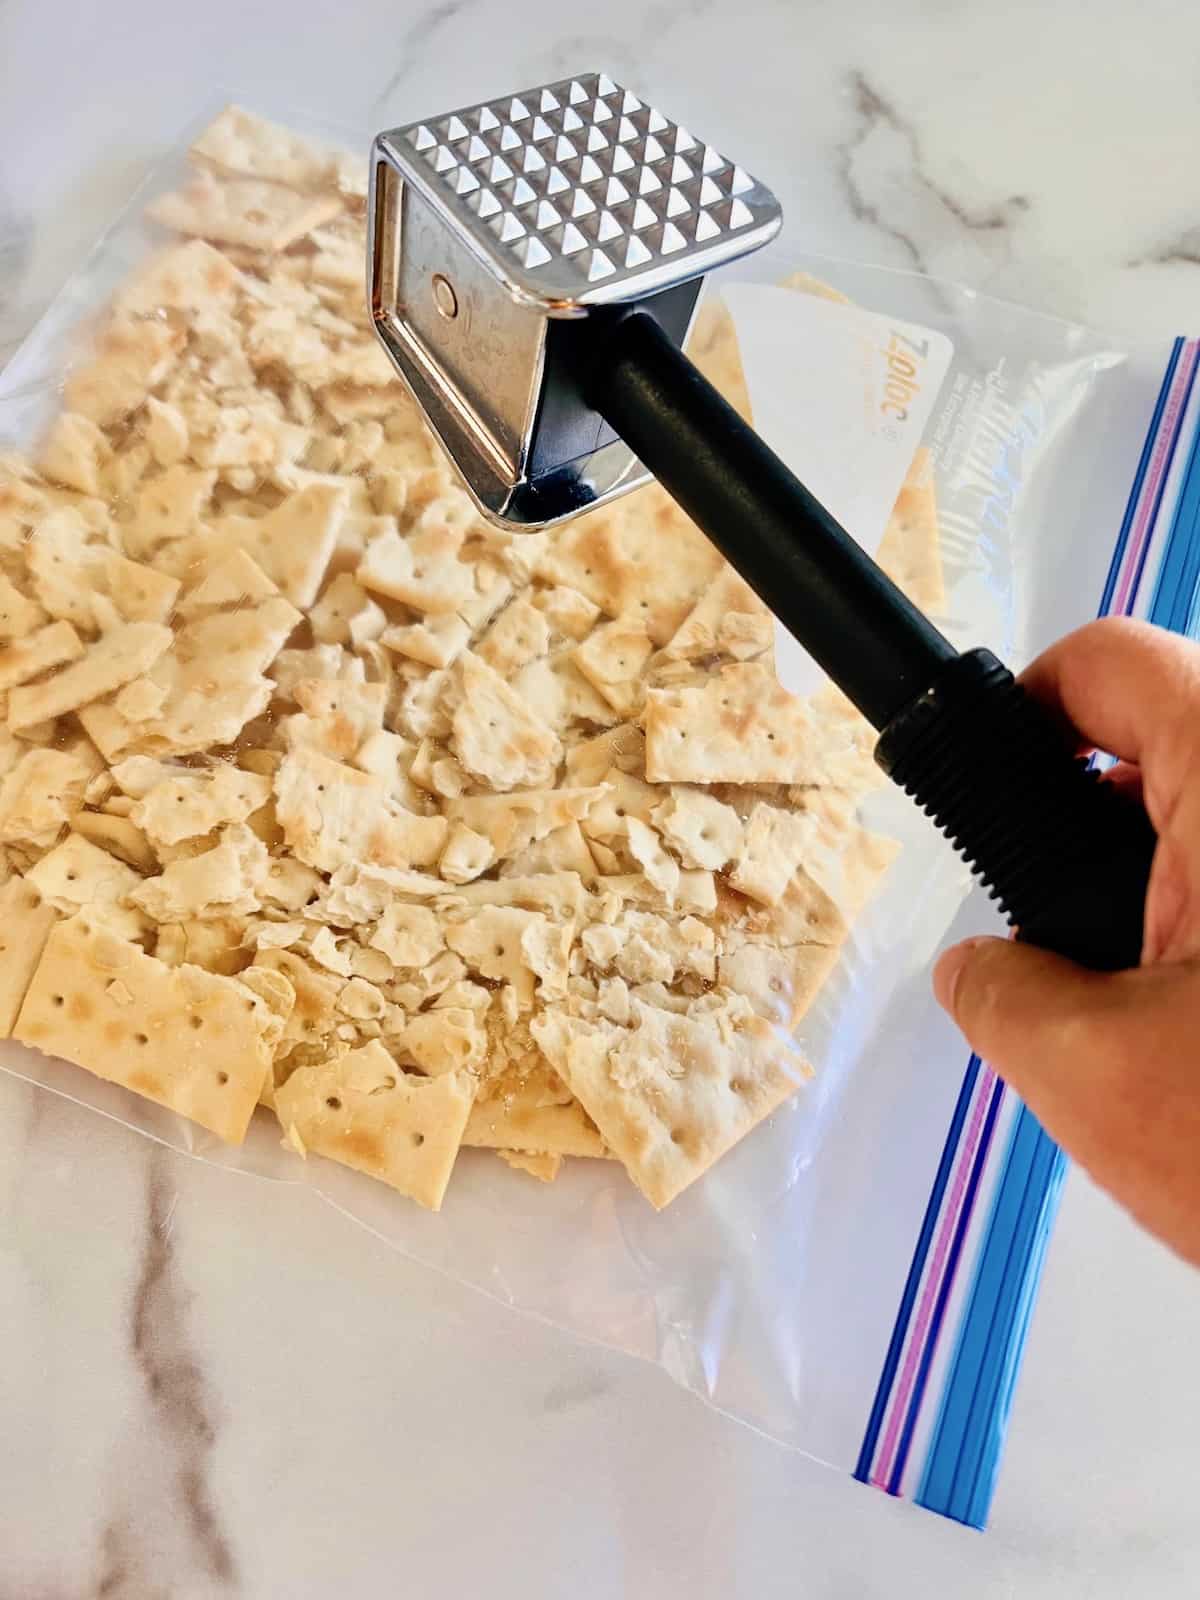 Ziploc bag filled with saltine crackers being crushed with kitchen mallet.